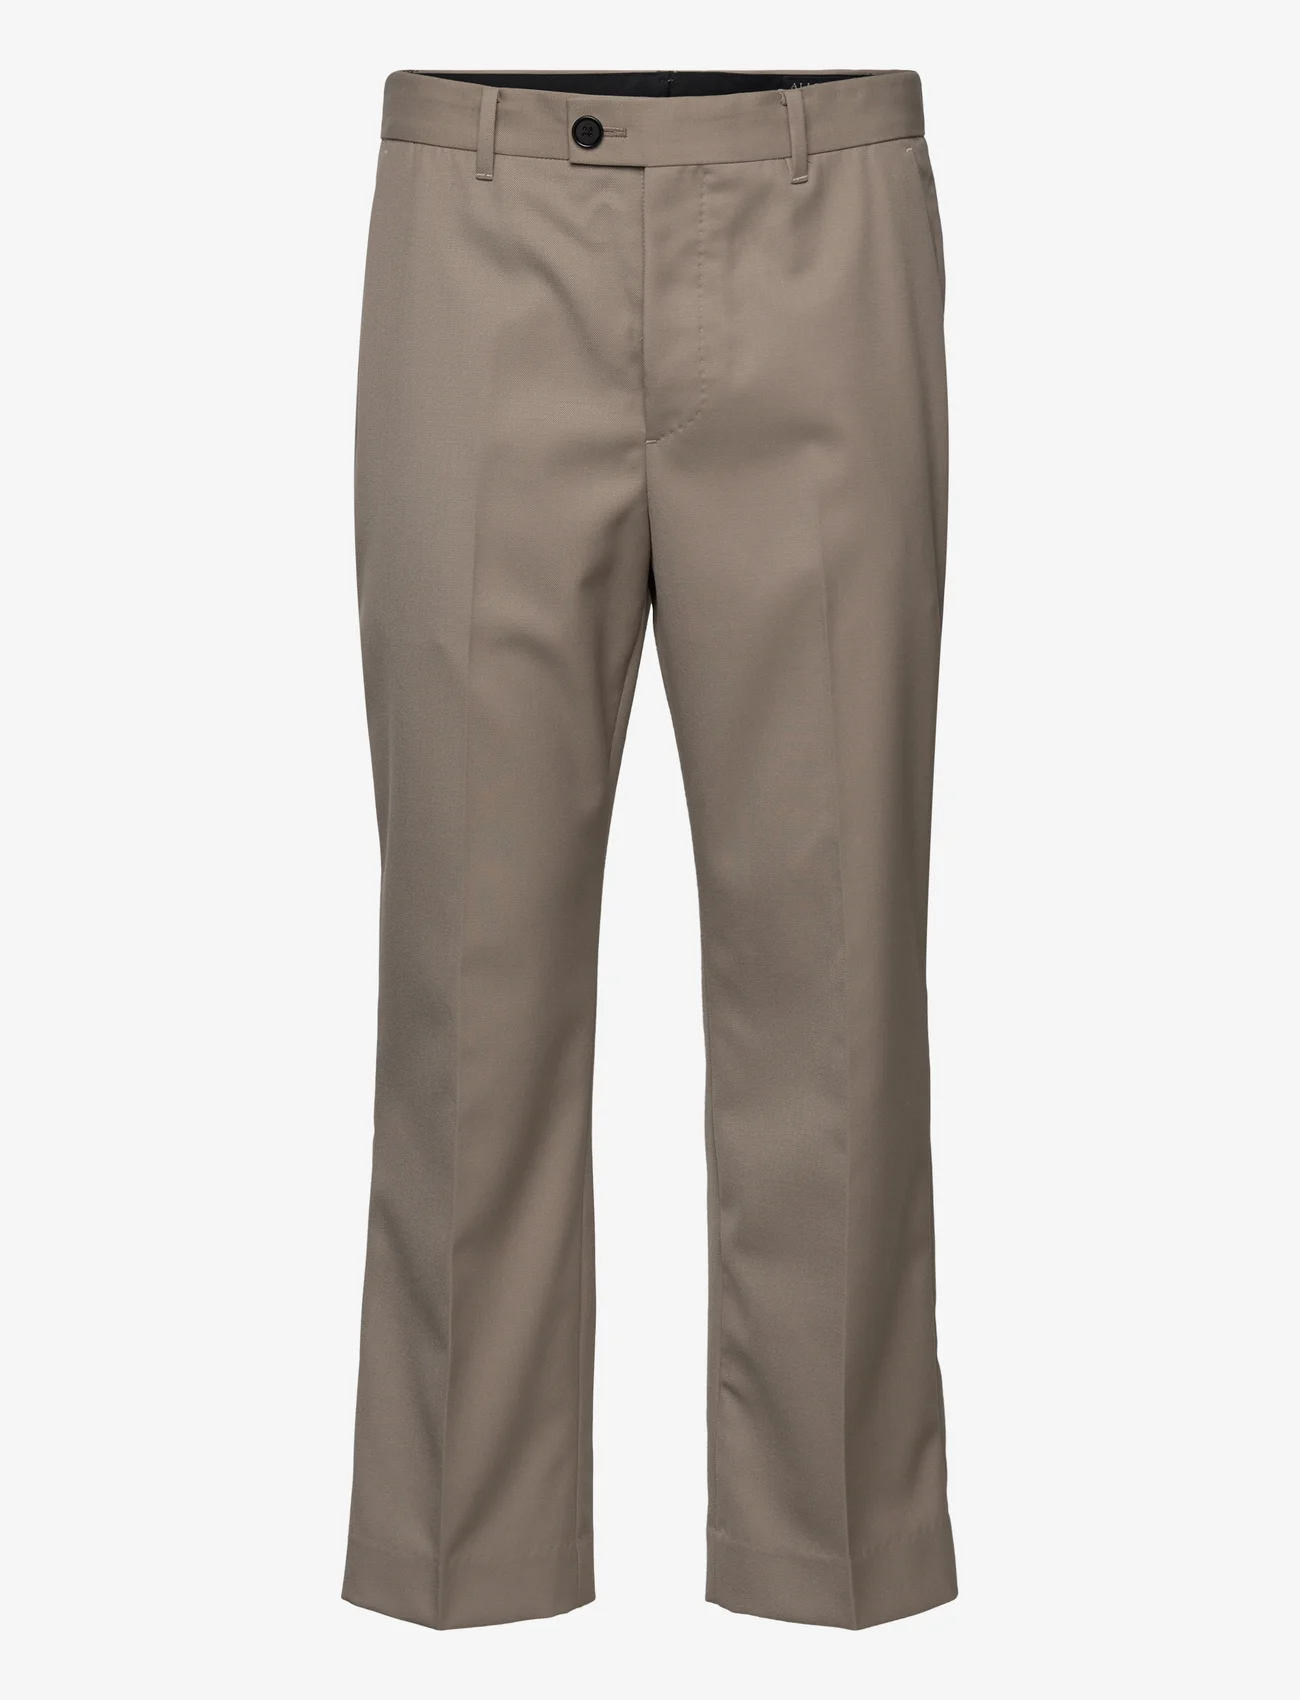 AllSaints - TANAR TROUSER - chinos - grey taupe - 0